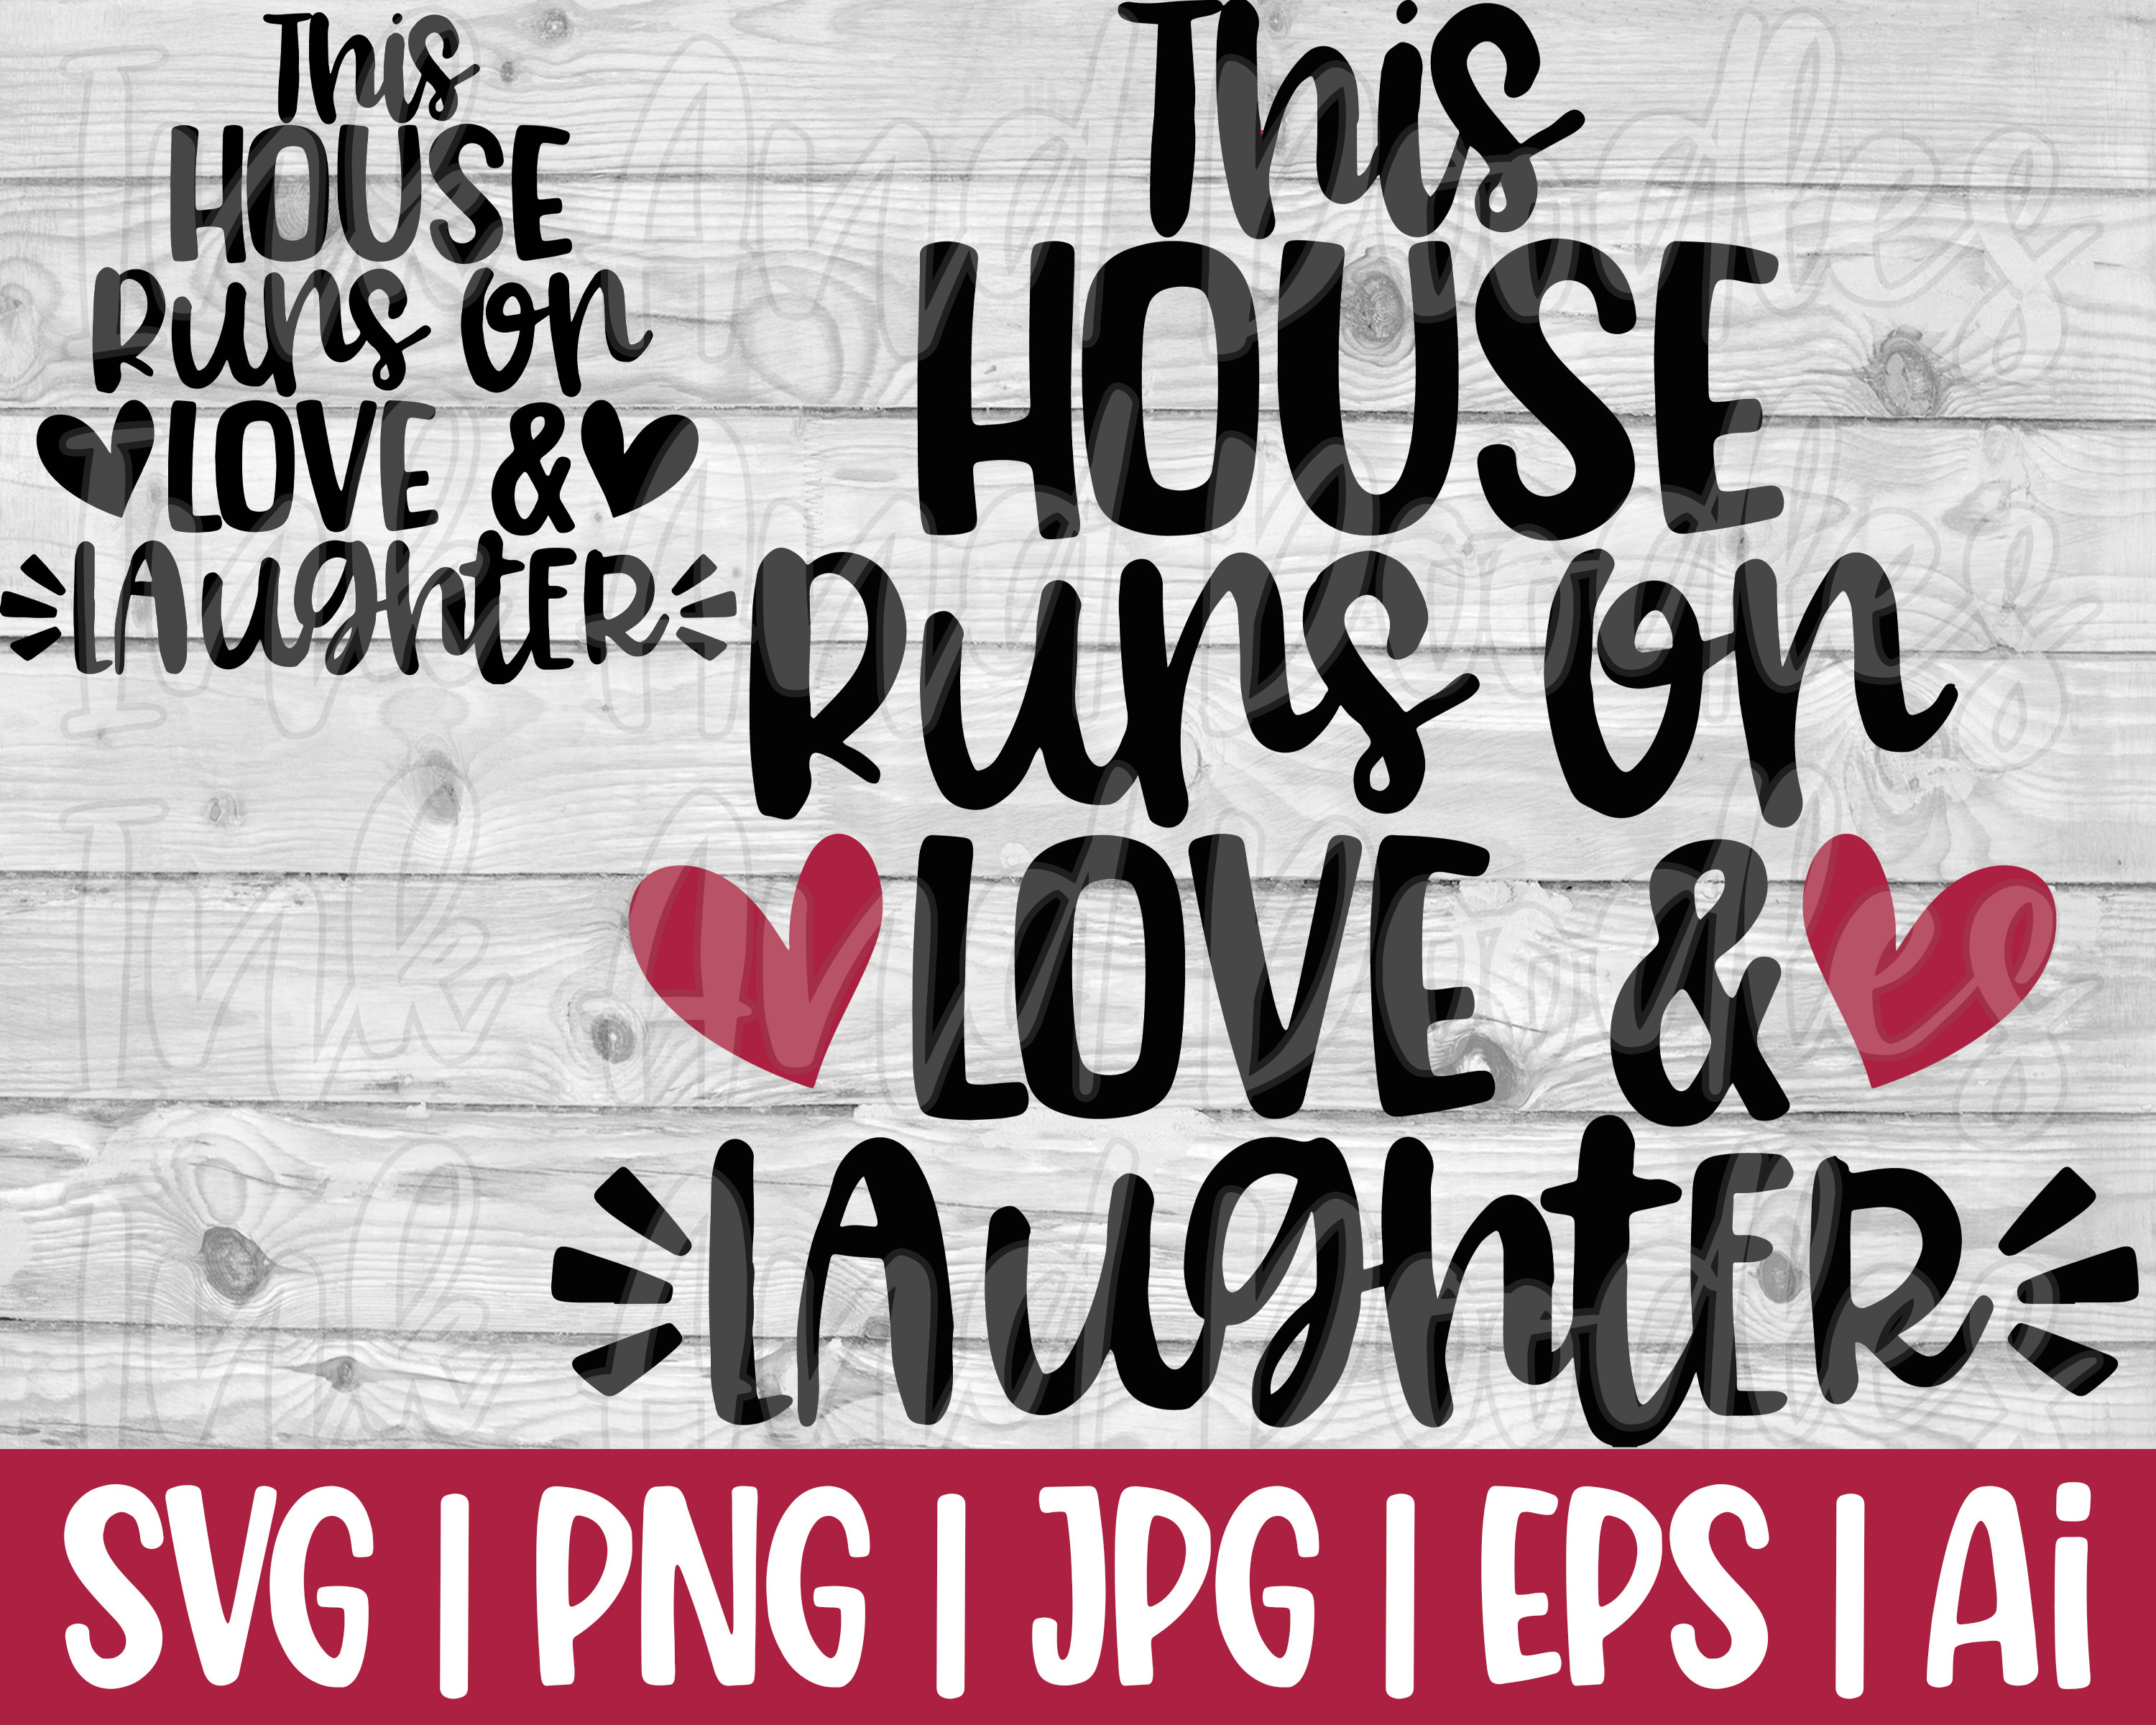 This House Runs On Love & Laughter Svg Home Decor Kitchen | Etsy